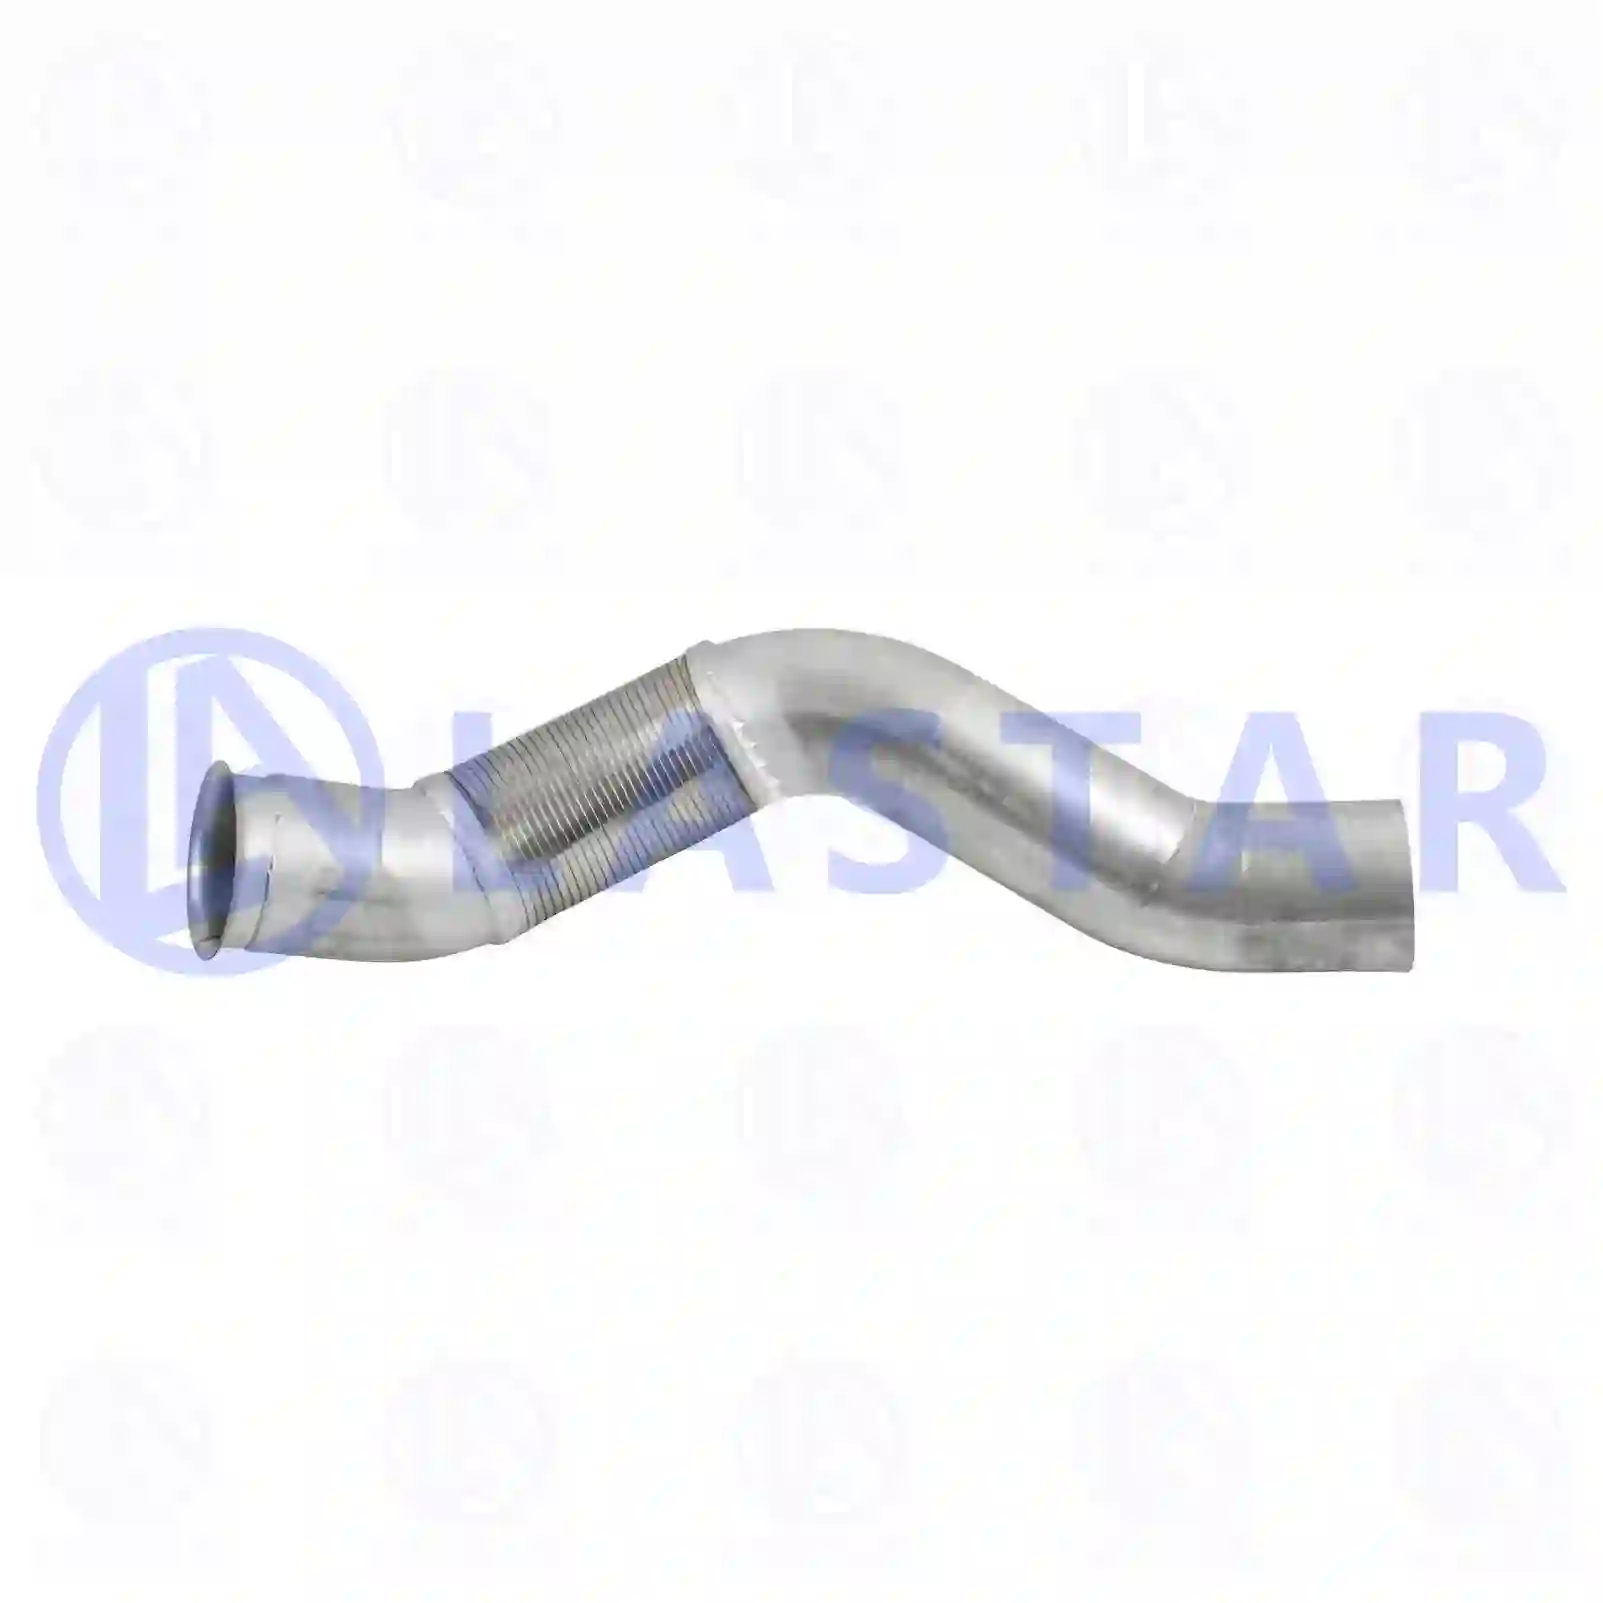 Exhaust pipe, 77706335, 9424903219, 94249 ||  77706335 Lastar Spare Part | Truck Spare Parts, Auotomotive Spare Parts Exhaust pipe, 77706335, 9424903219, 94249 ||  77706335 Lastar Spare Part | Truck Spare Parts, Auotomotive Spare Parts